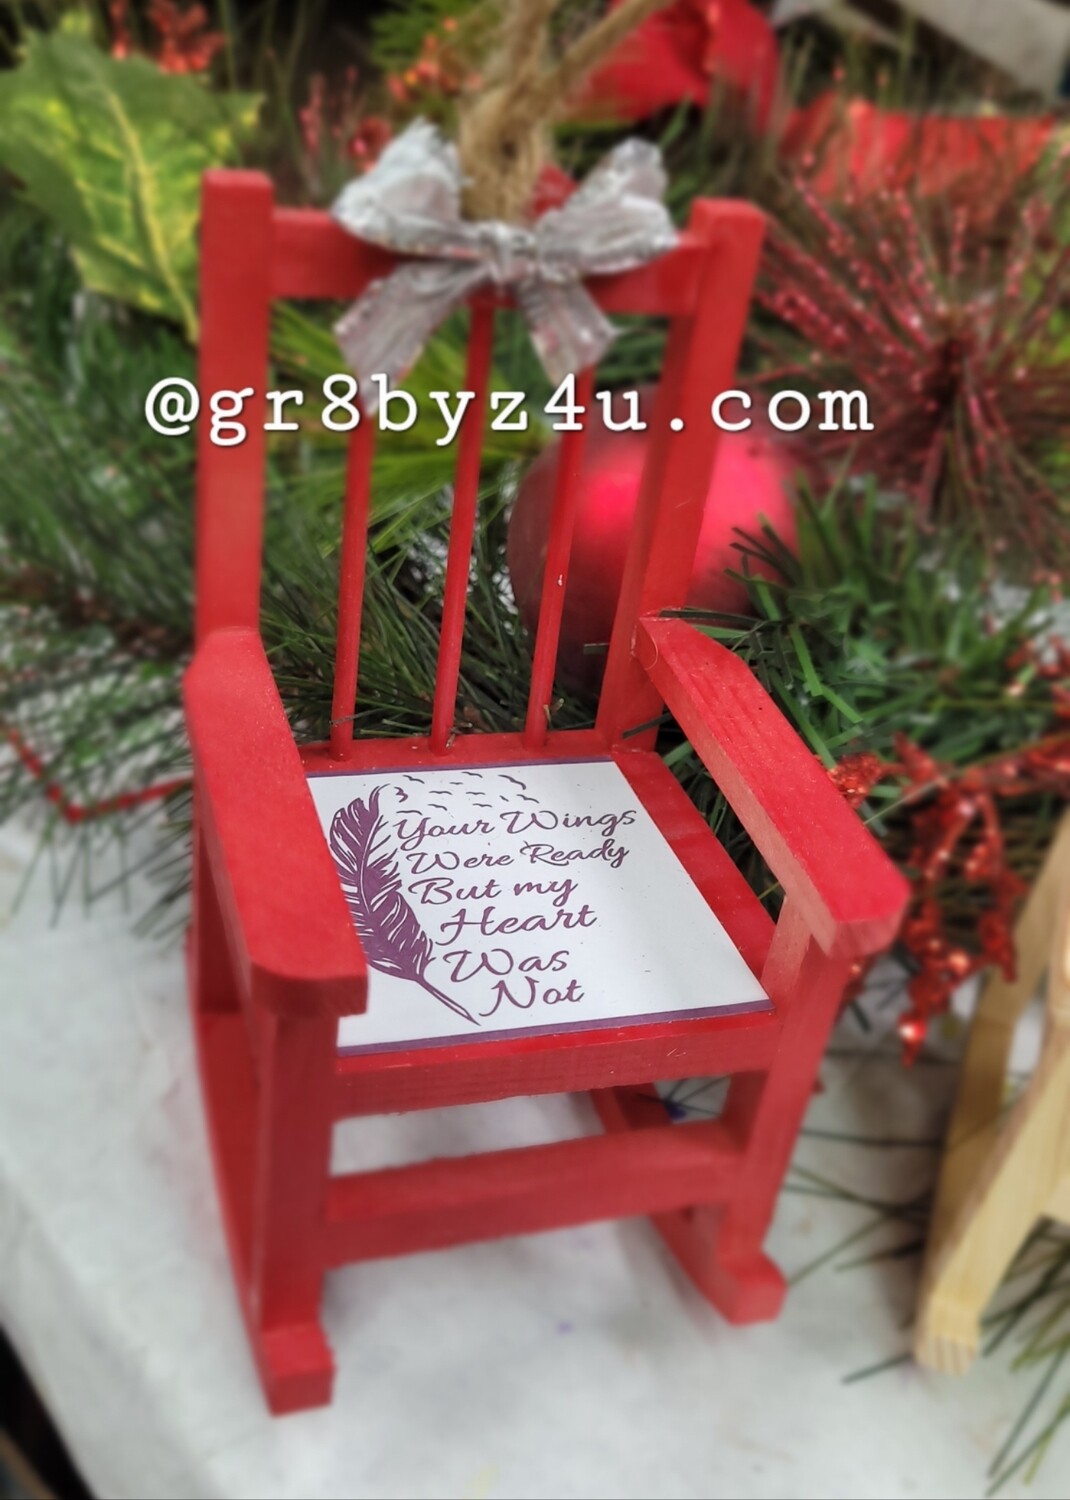 Loss of a loved one rocking chair ornament. Empty chair poem. Your wings were ready but my heart was not